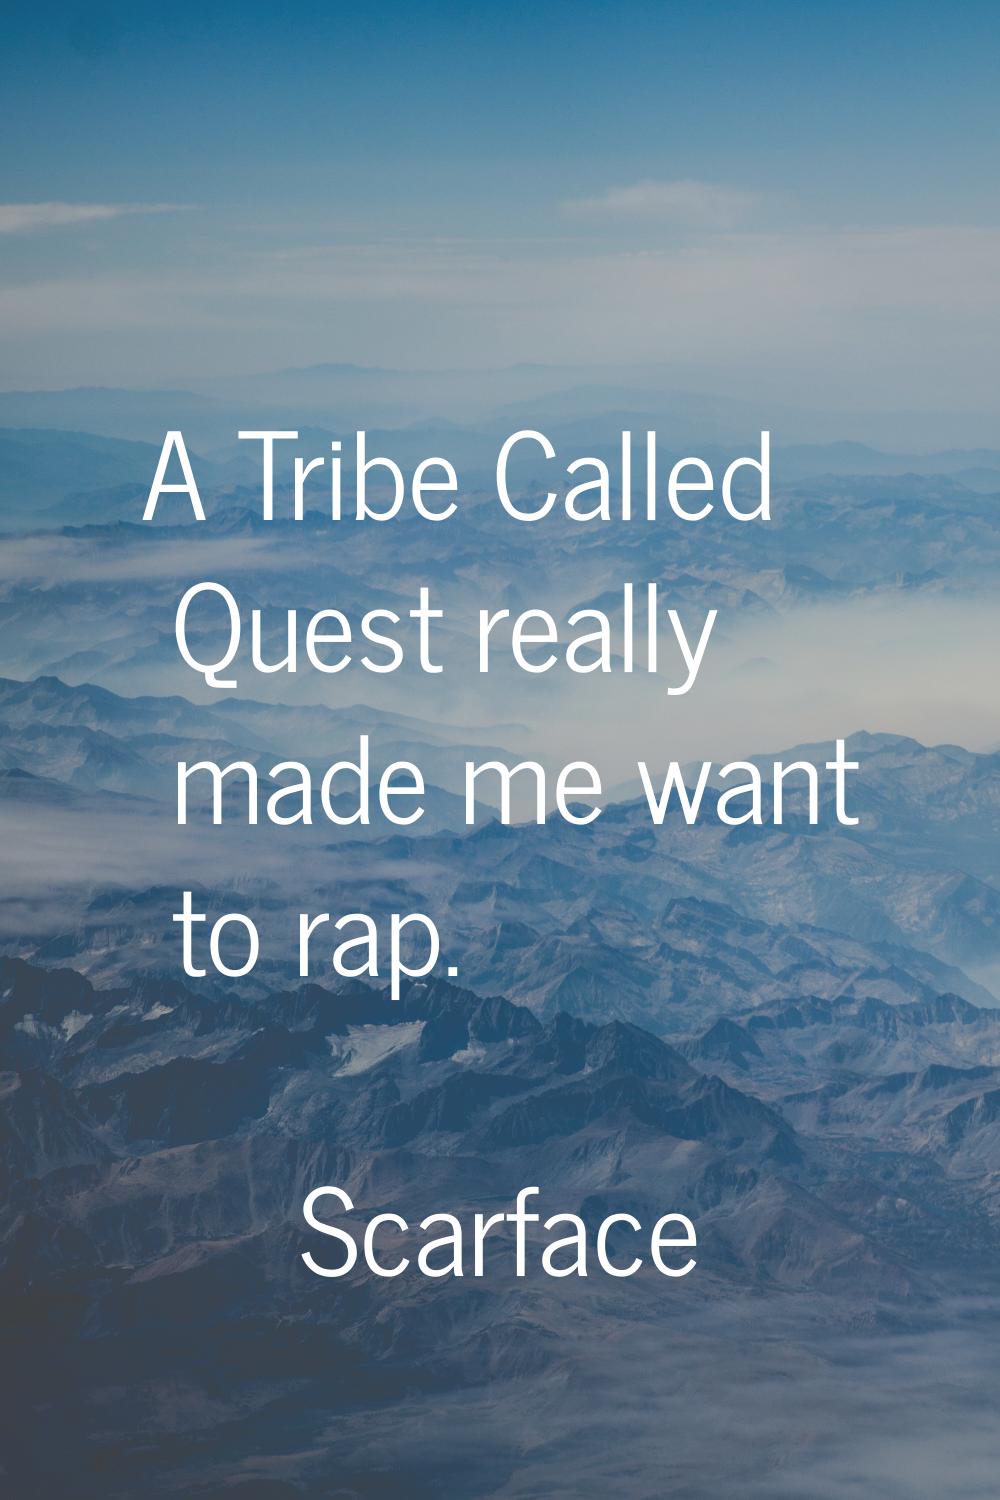 A Tribe Called Quest really made me want to rap.